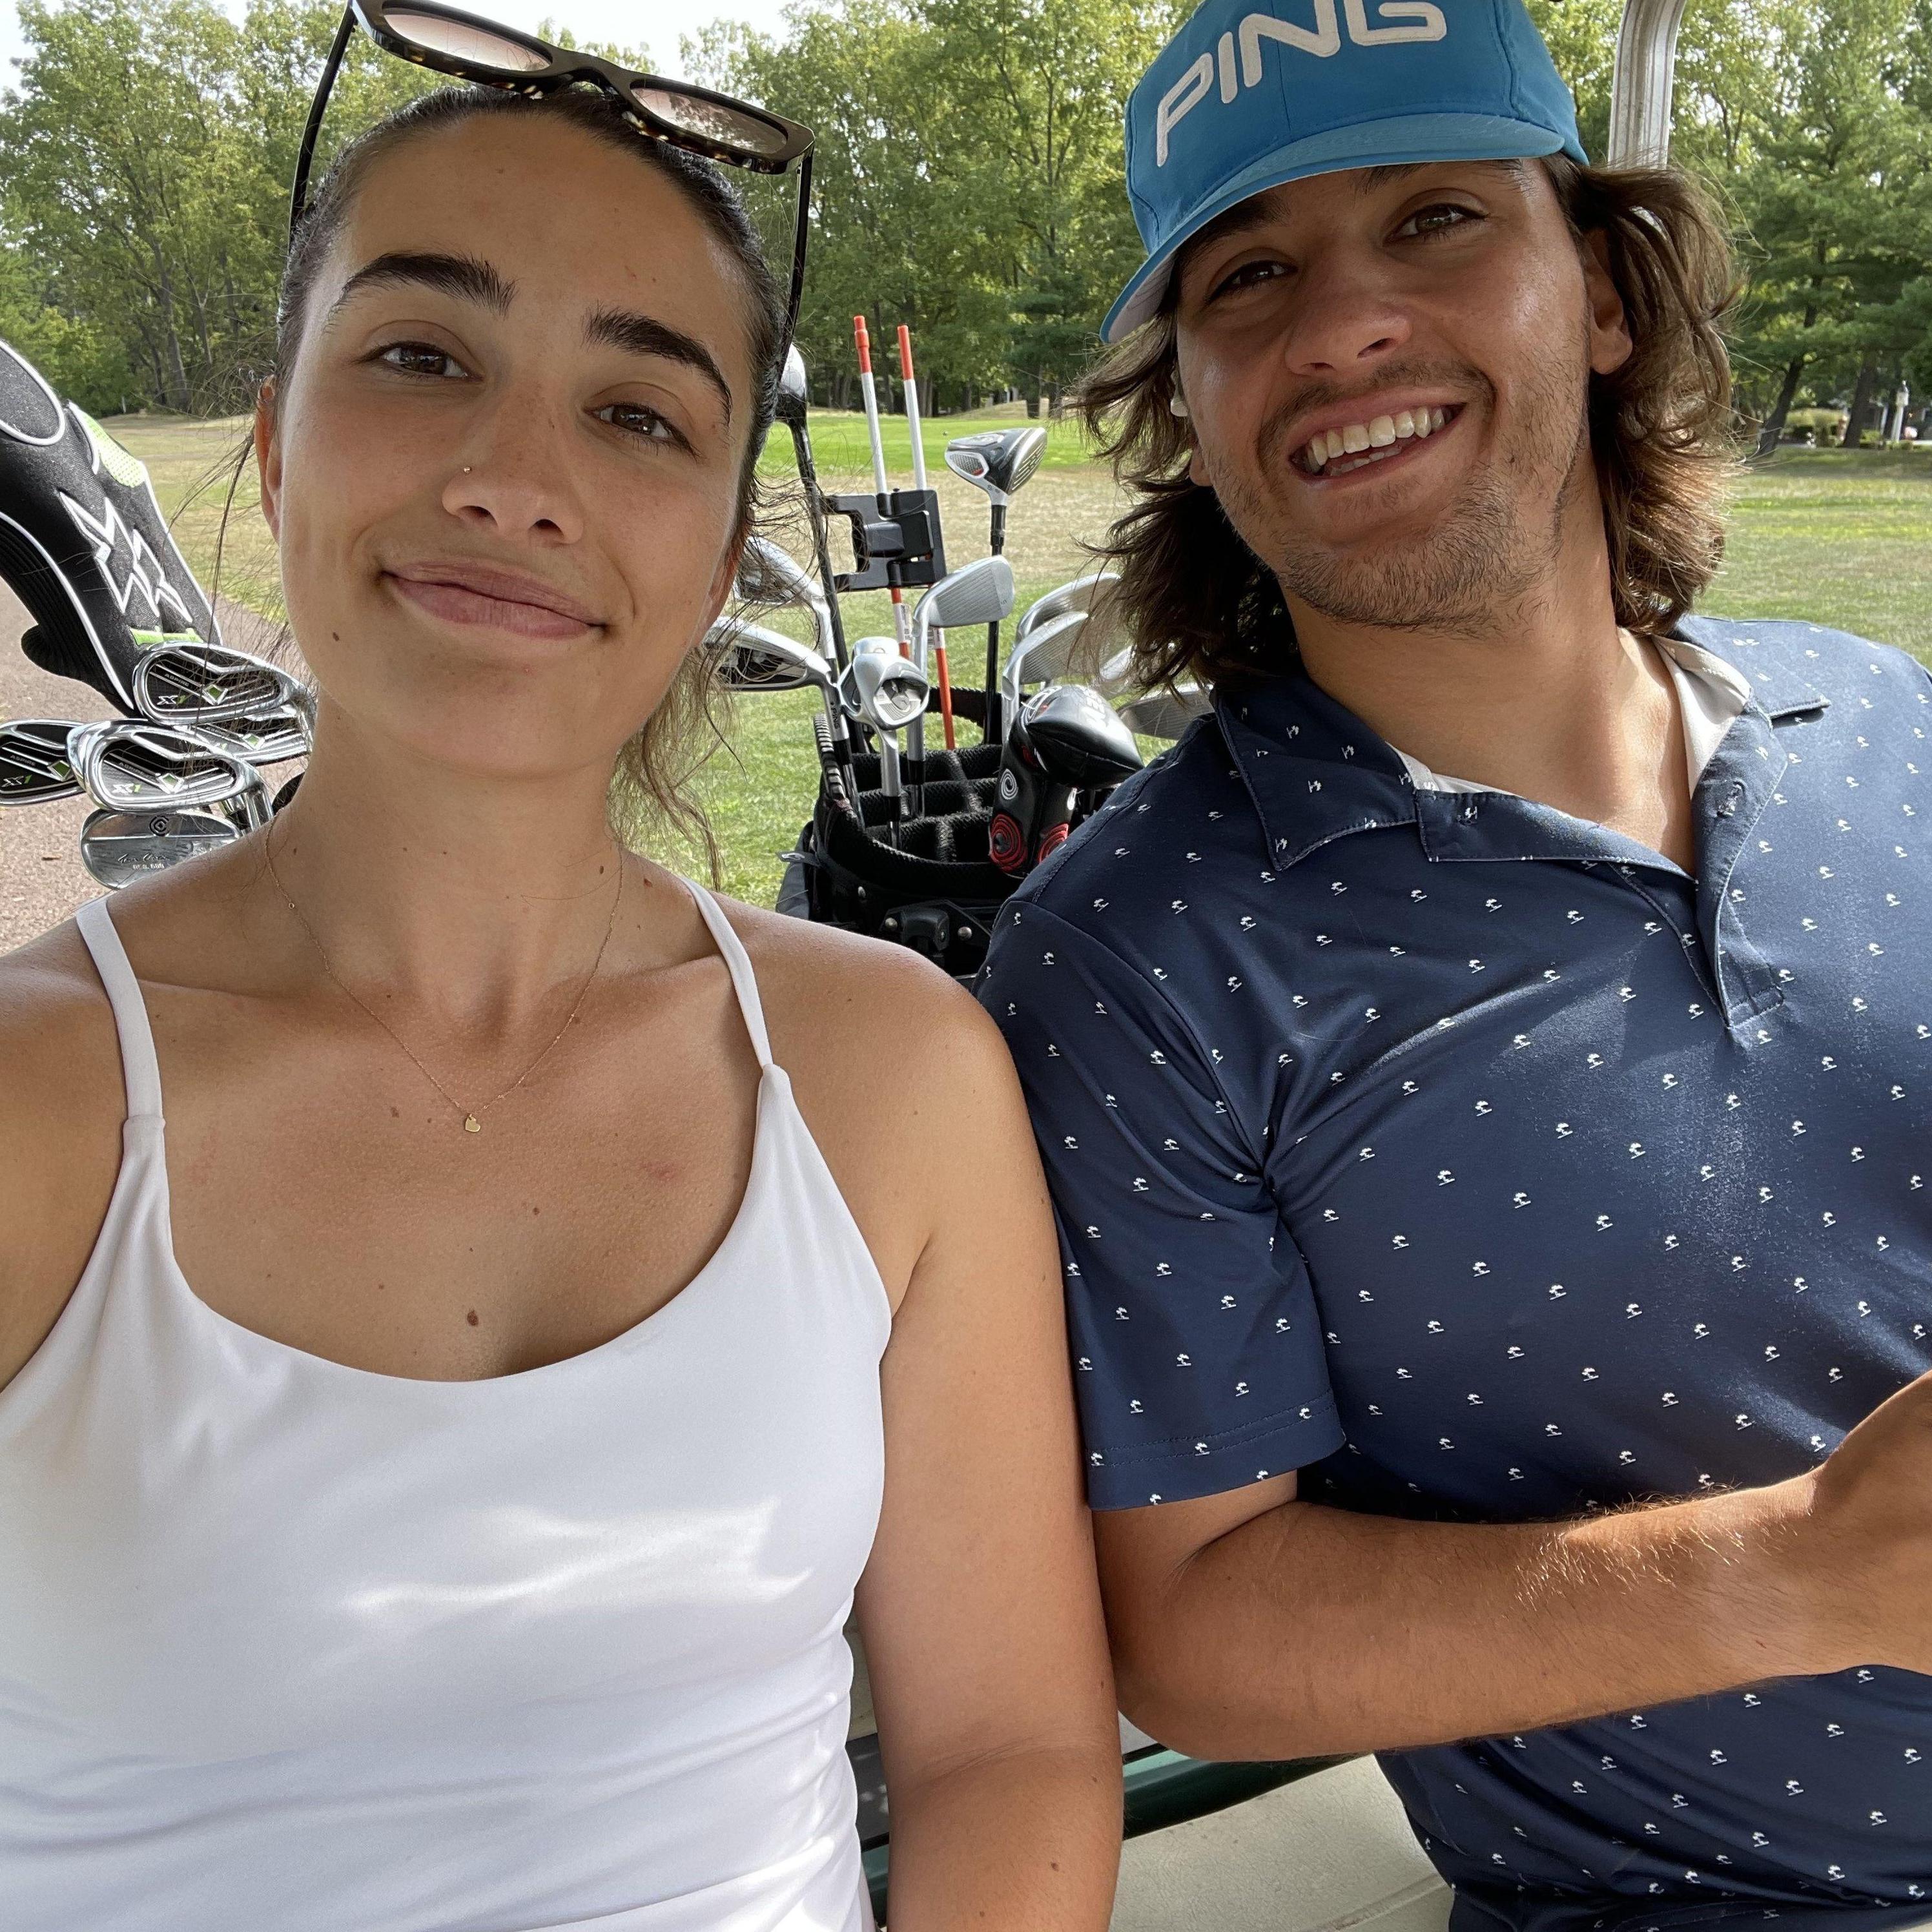 Celine's first glimpse into Joe's love (obsession) with golf